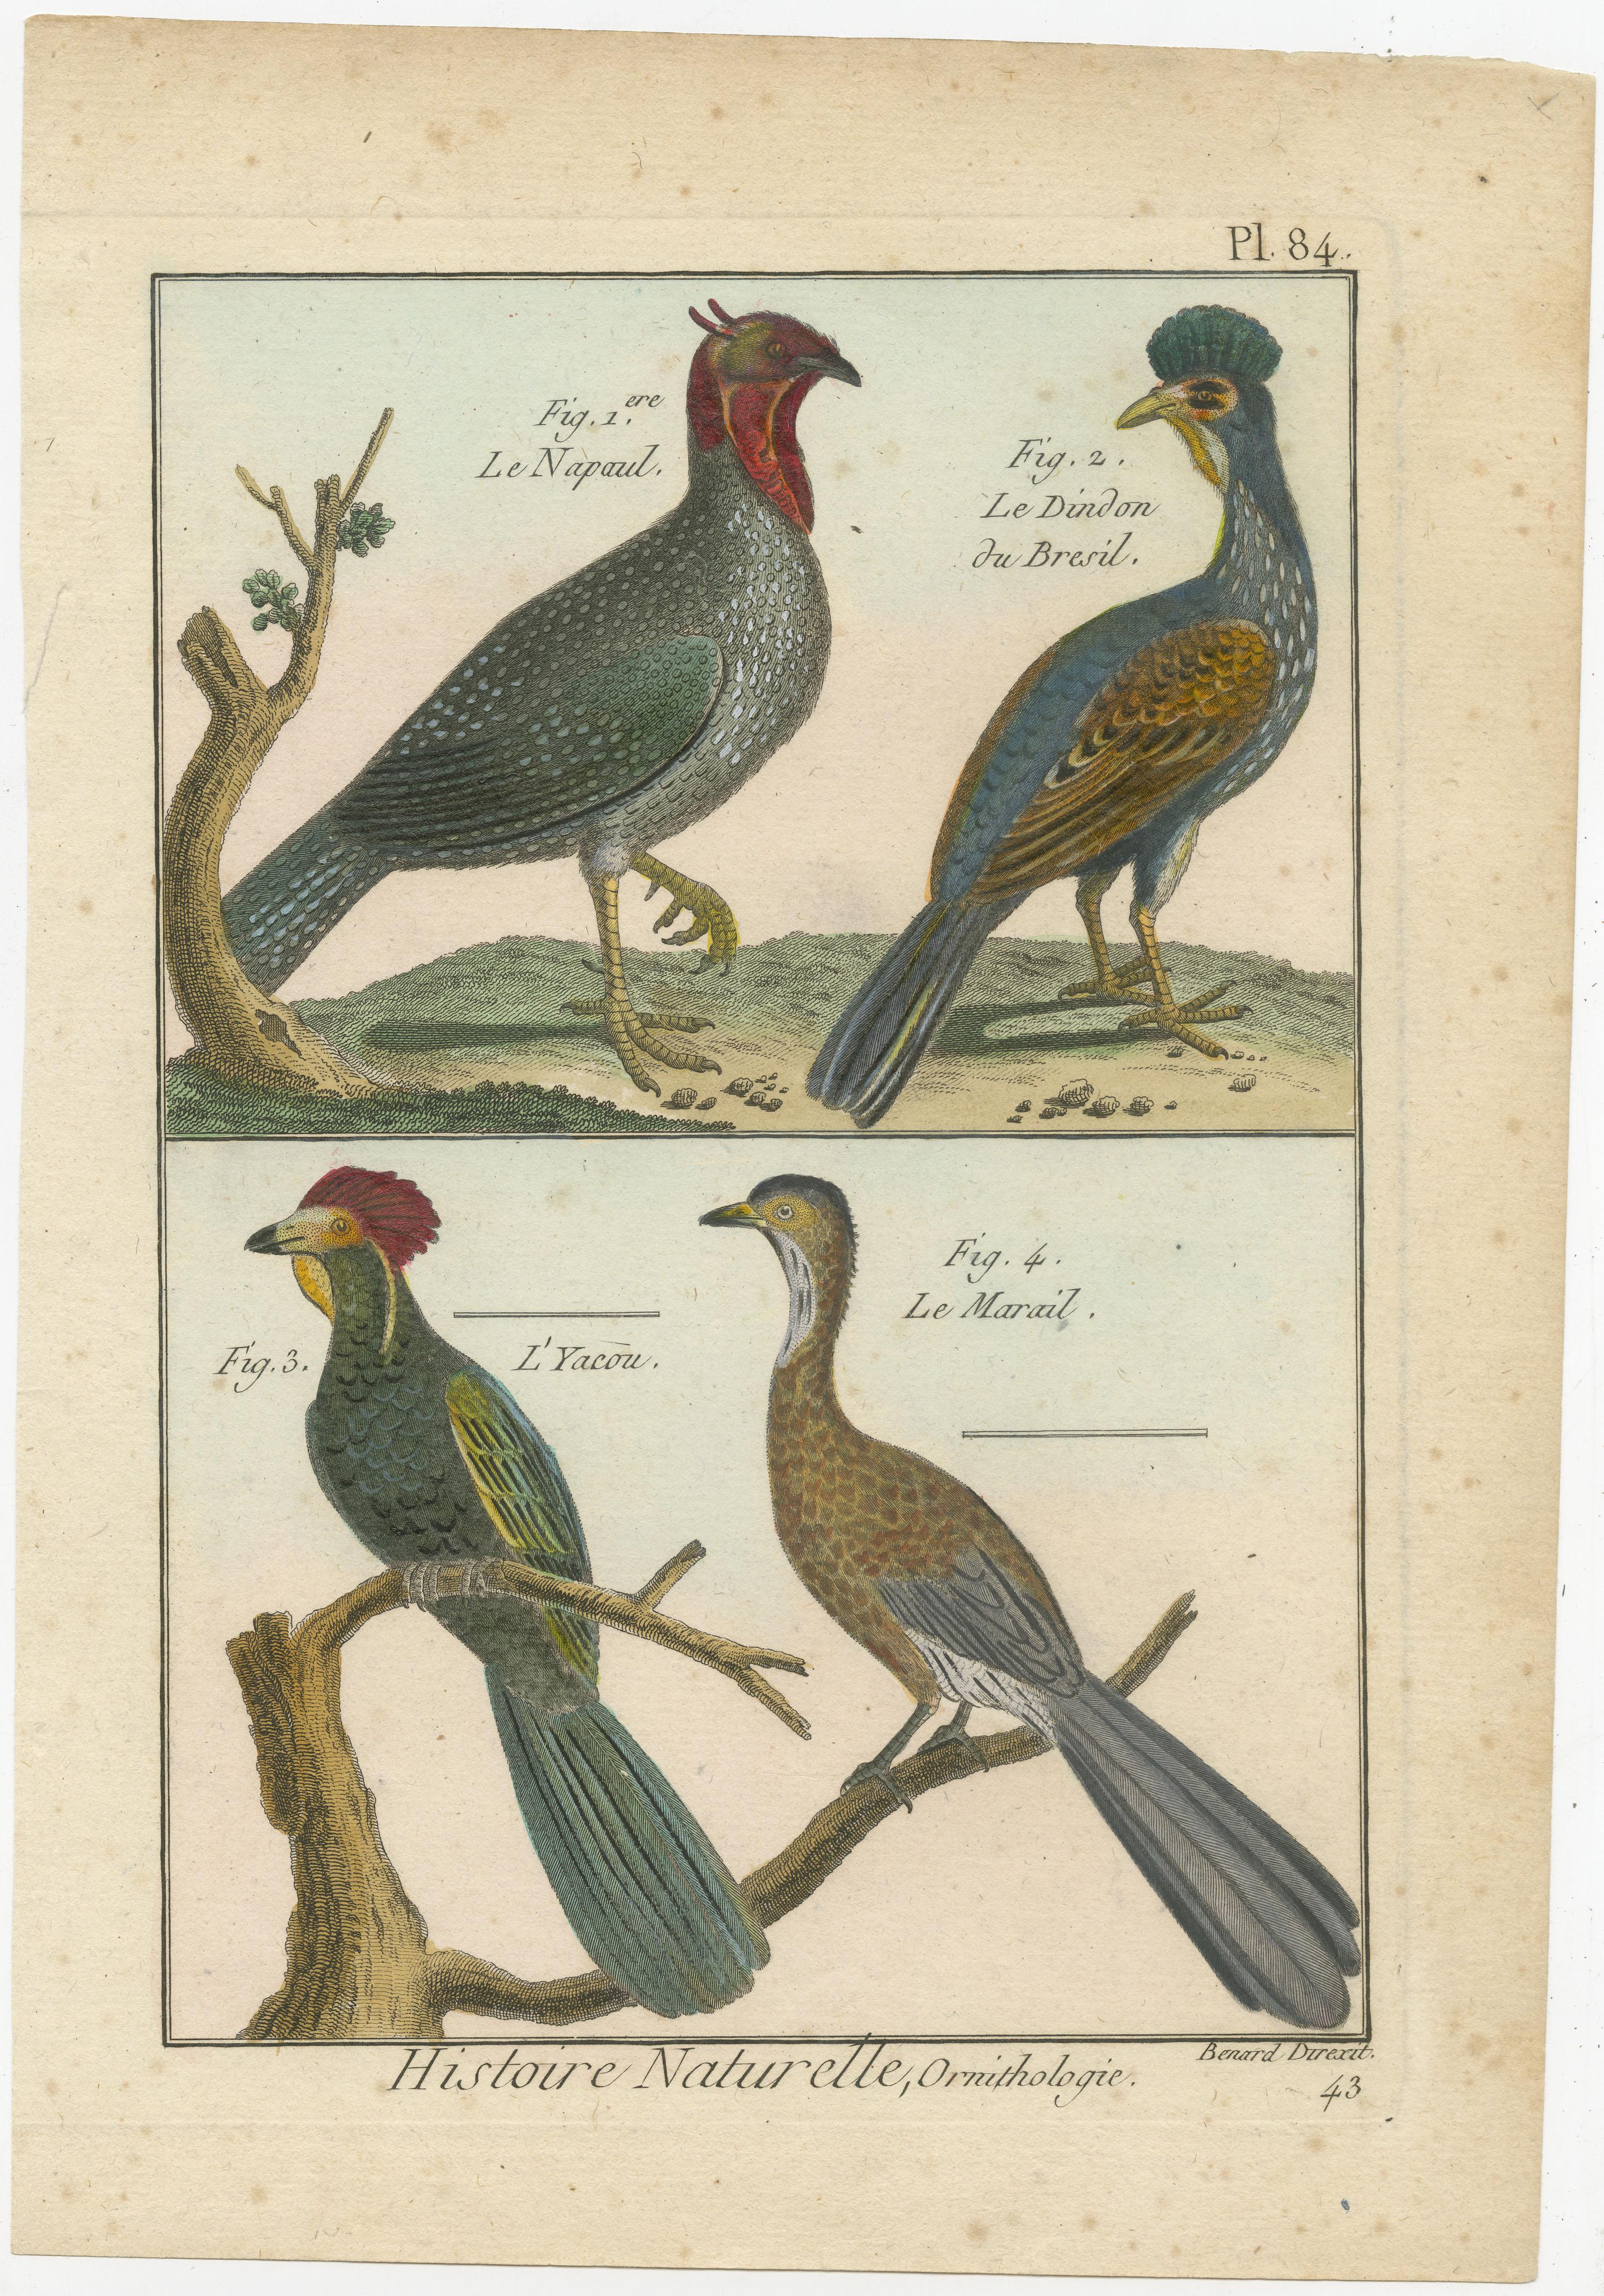 An authentic perfect and bright, originally hand-colored, illustration of four birds, on parchment paper (copper engraving). It has a fine shining because of the authenticly applied egg-yolk as varnish. The Artist is Robert Bernard (1792). The